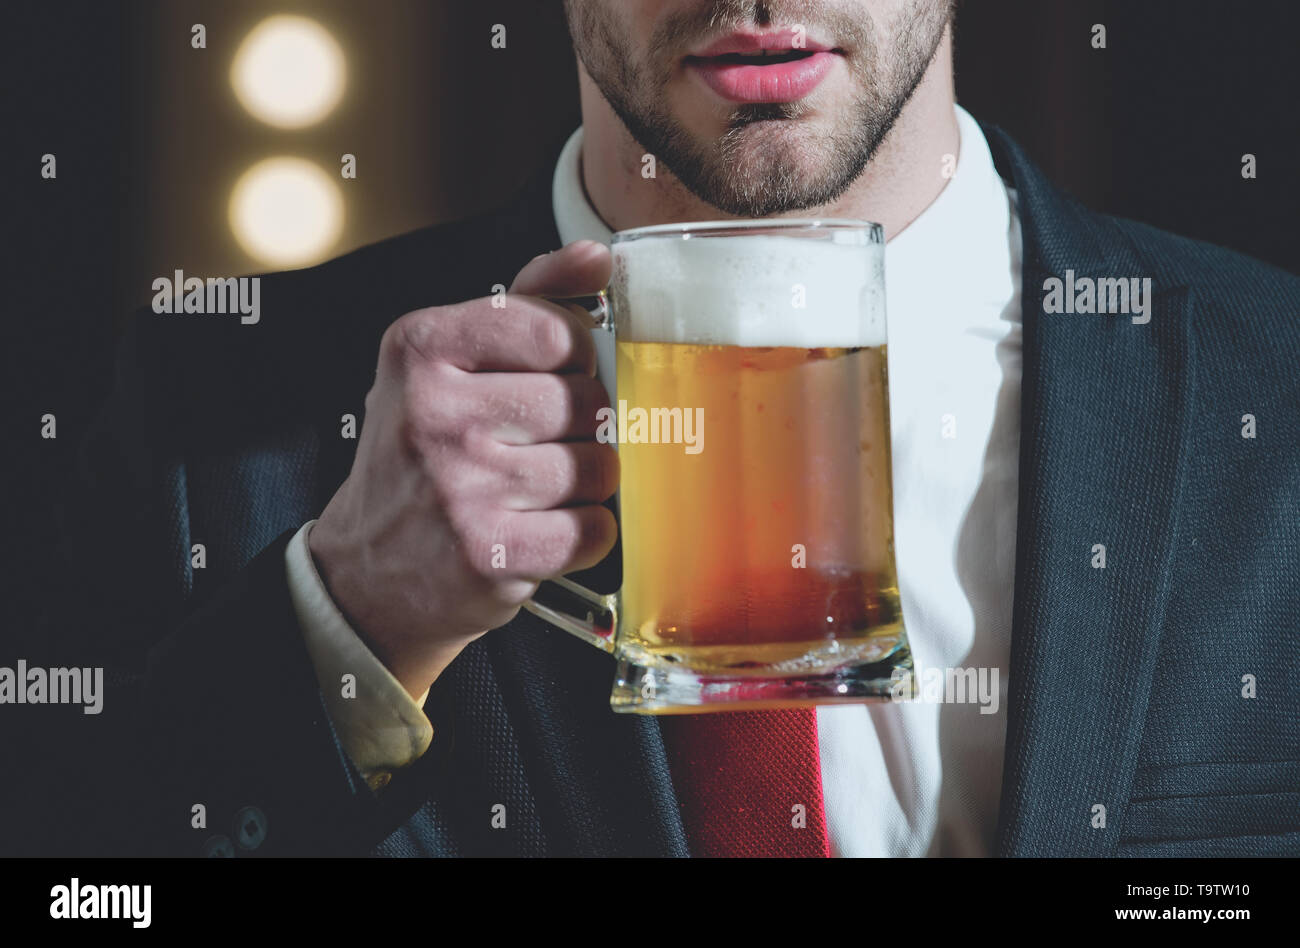 glass of beer in hand of sommelier man Stock Photo